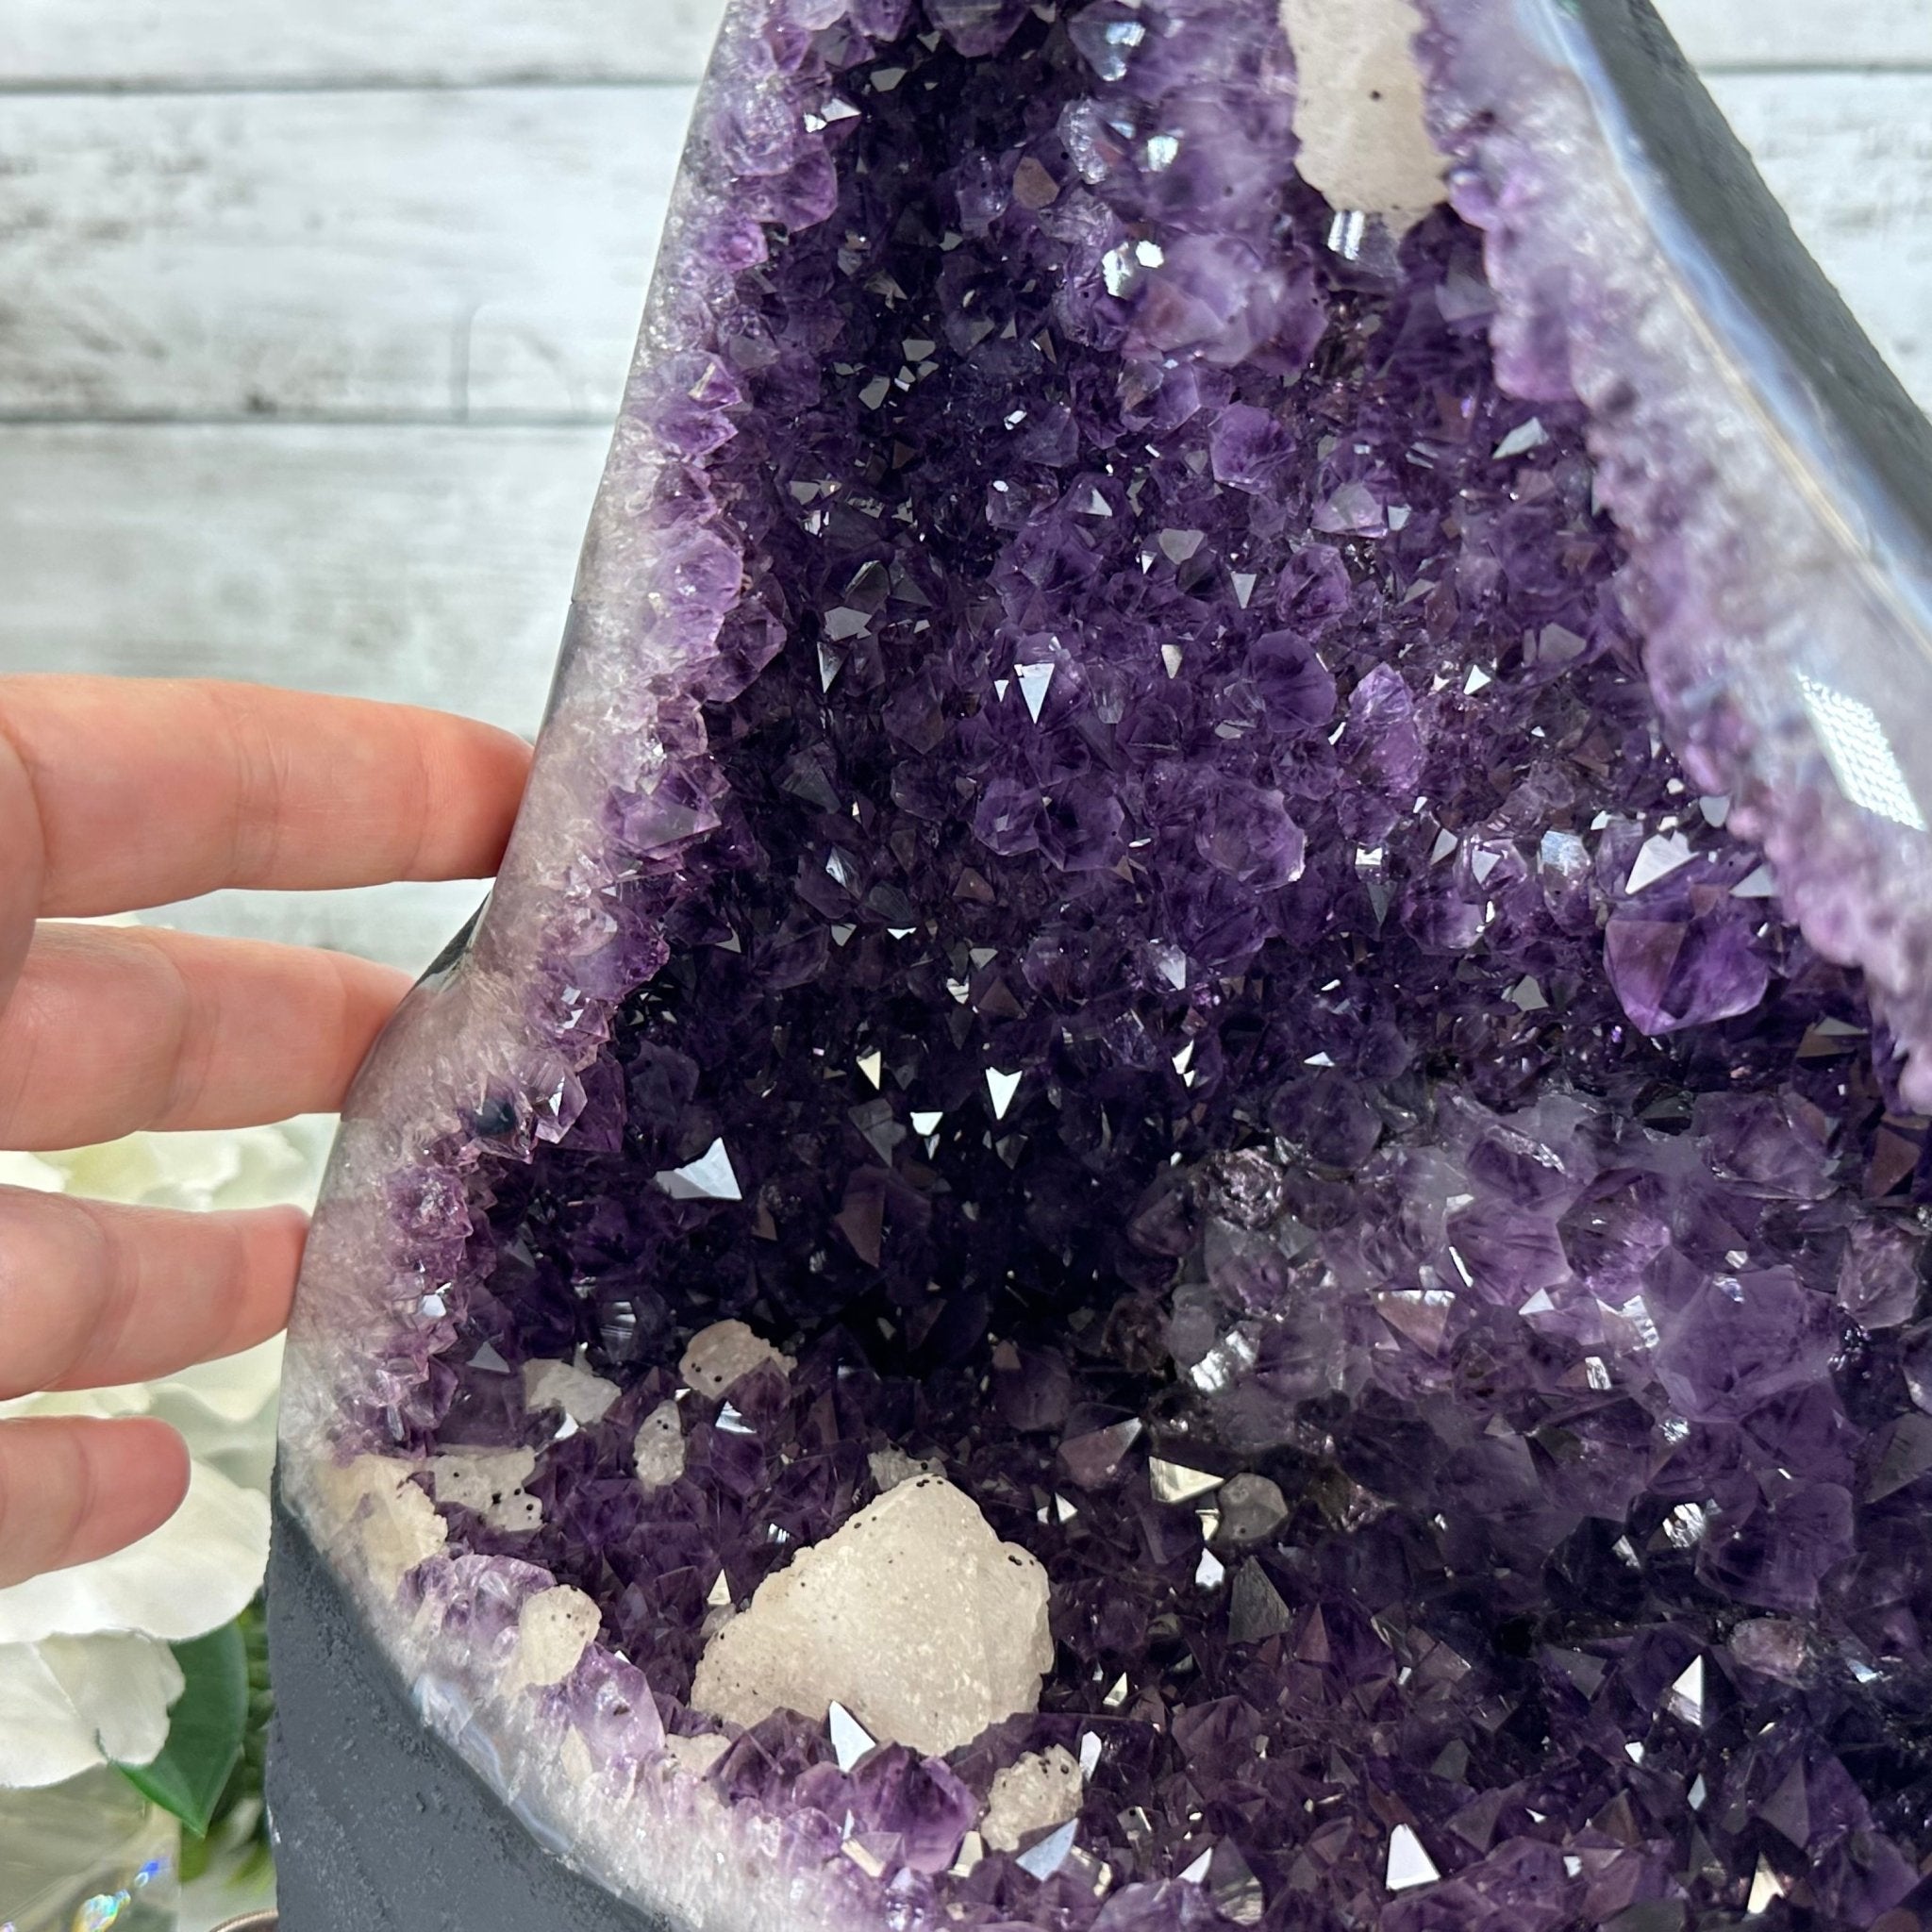 Extra Plus Quality Brazilian Amethyst Cathedral, 20.5 lbs & 10.8" Tall Model #5601-0839 by Brazil Gems - Brazil GemsBrazil GemsExtra Plus Quality Brazilian Amethyst Cathedral, 20.5 lbs & 10.8" Tall Model #5601-0839 by Brazil GemsCathedrals5601-0839